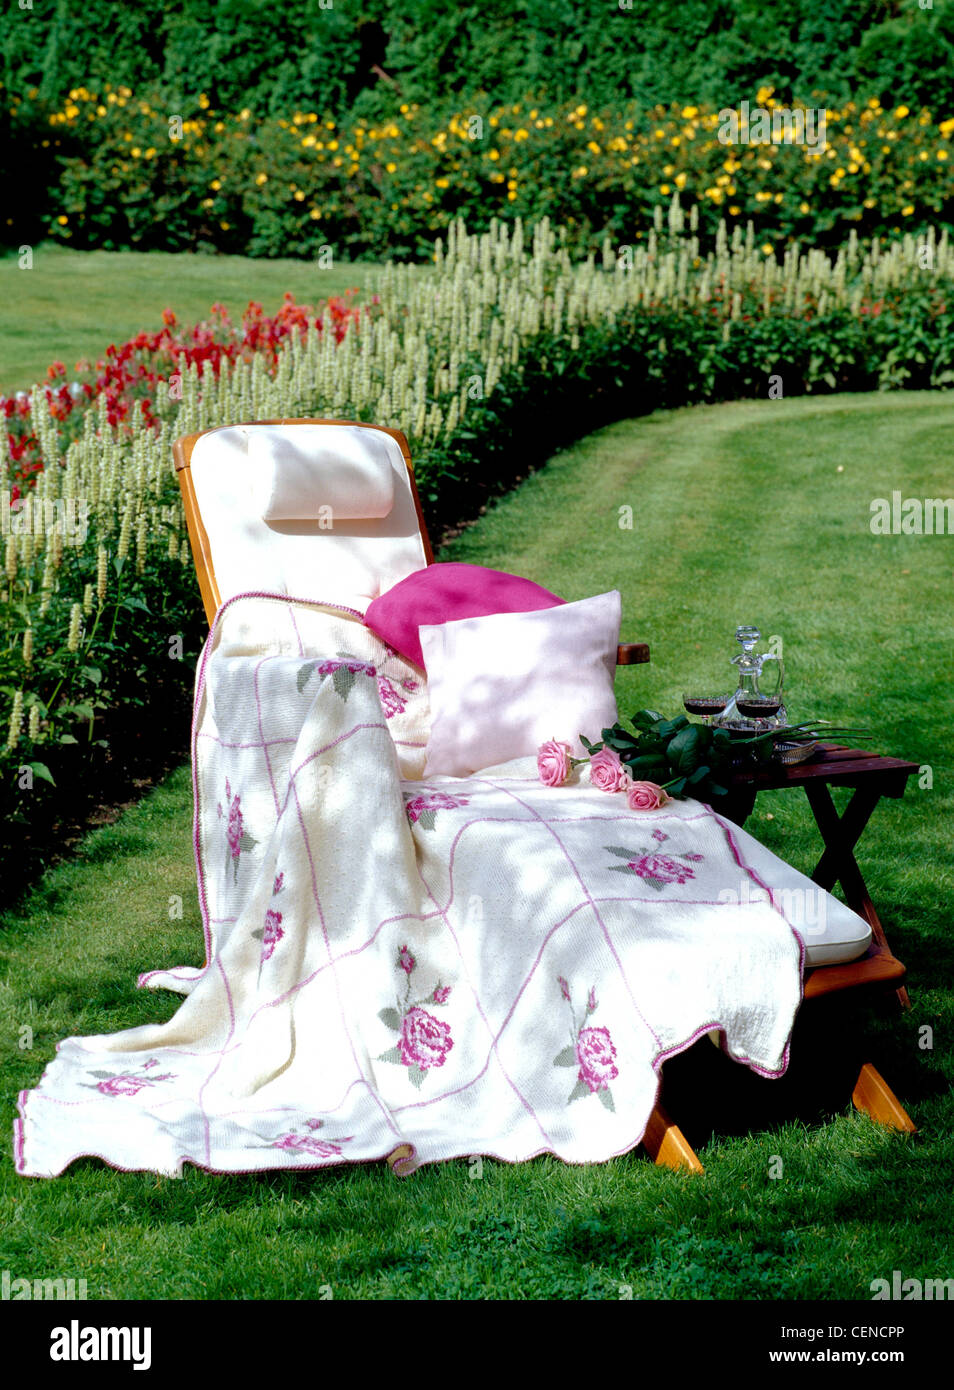 Wood sunlounger white cushion, headrest, and pink and white small cushions, draped white blanket embroidered pink squares and Stock Photo